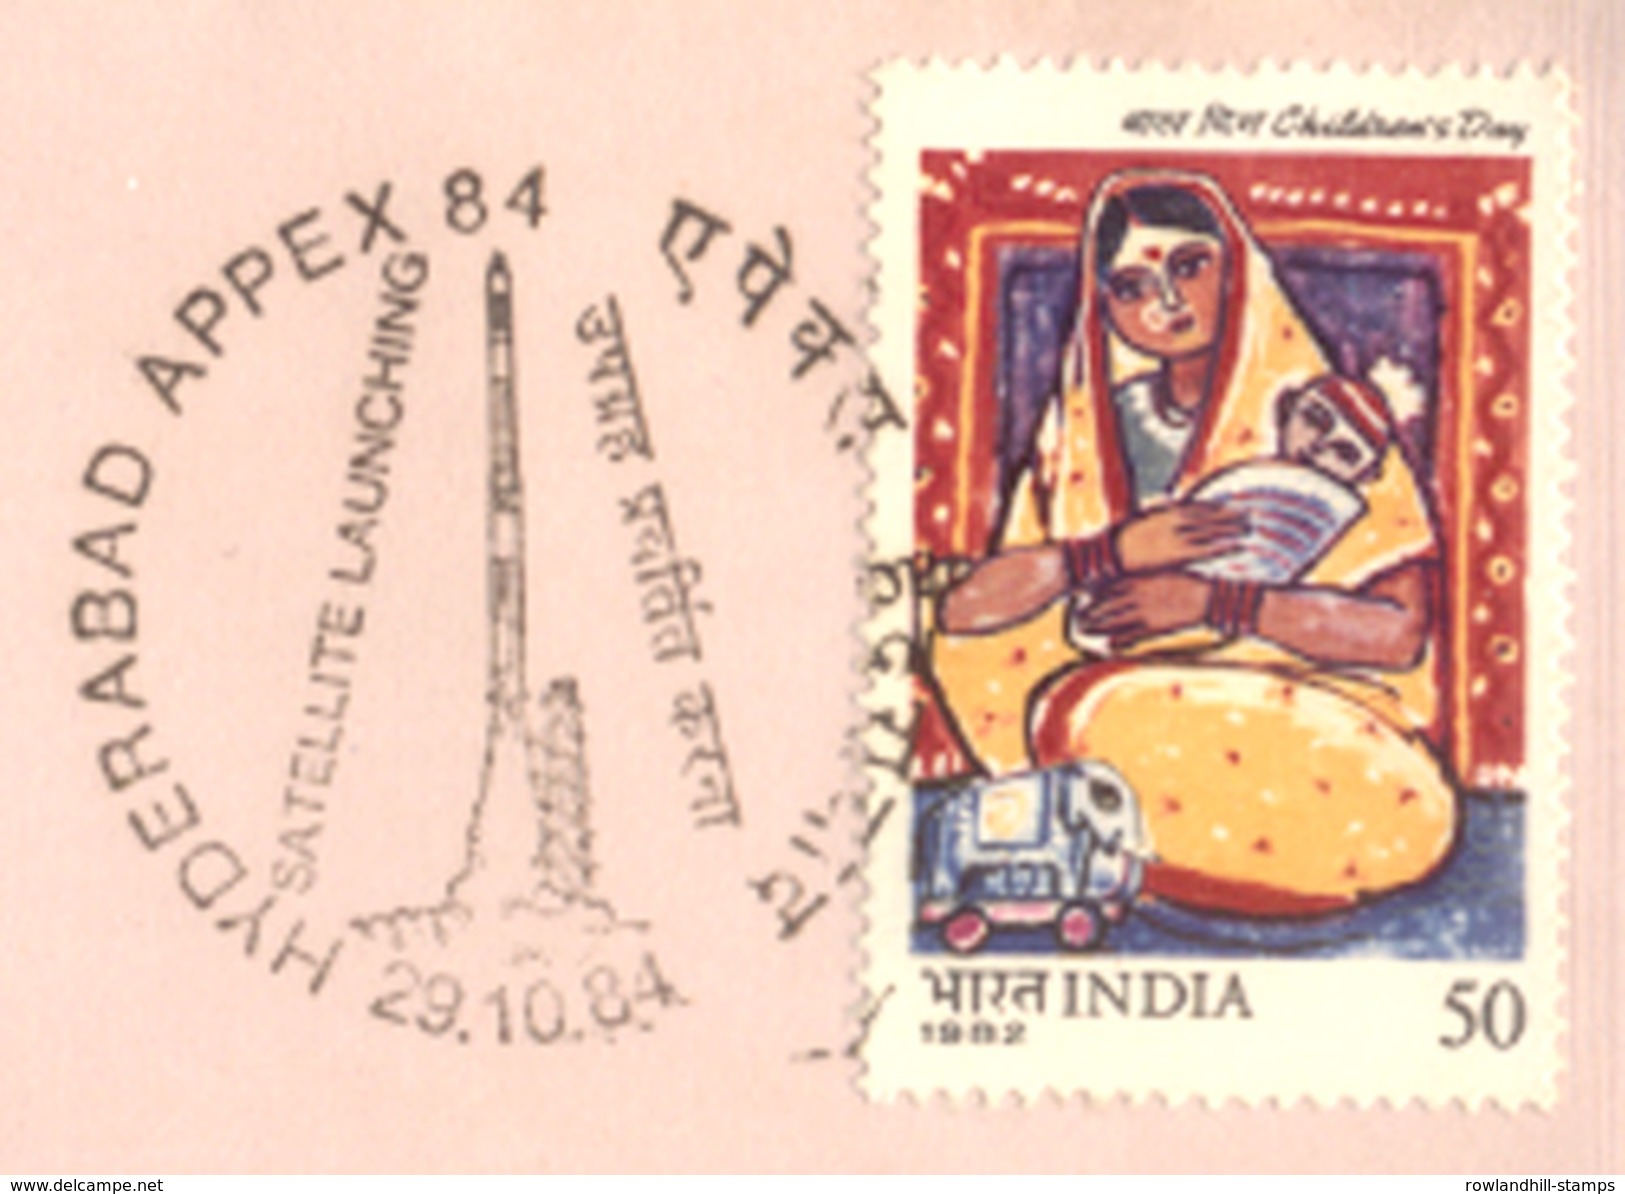 India 1984 Special Cover, Satellite Launching, APPEX - 84, Rocket, Space, SLV- 3, Hyderabad, Technology, Science, Spci79 - Asie